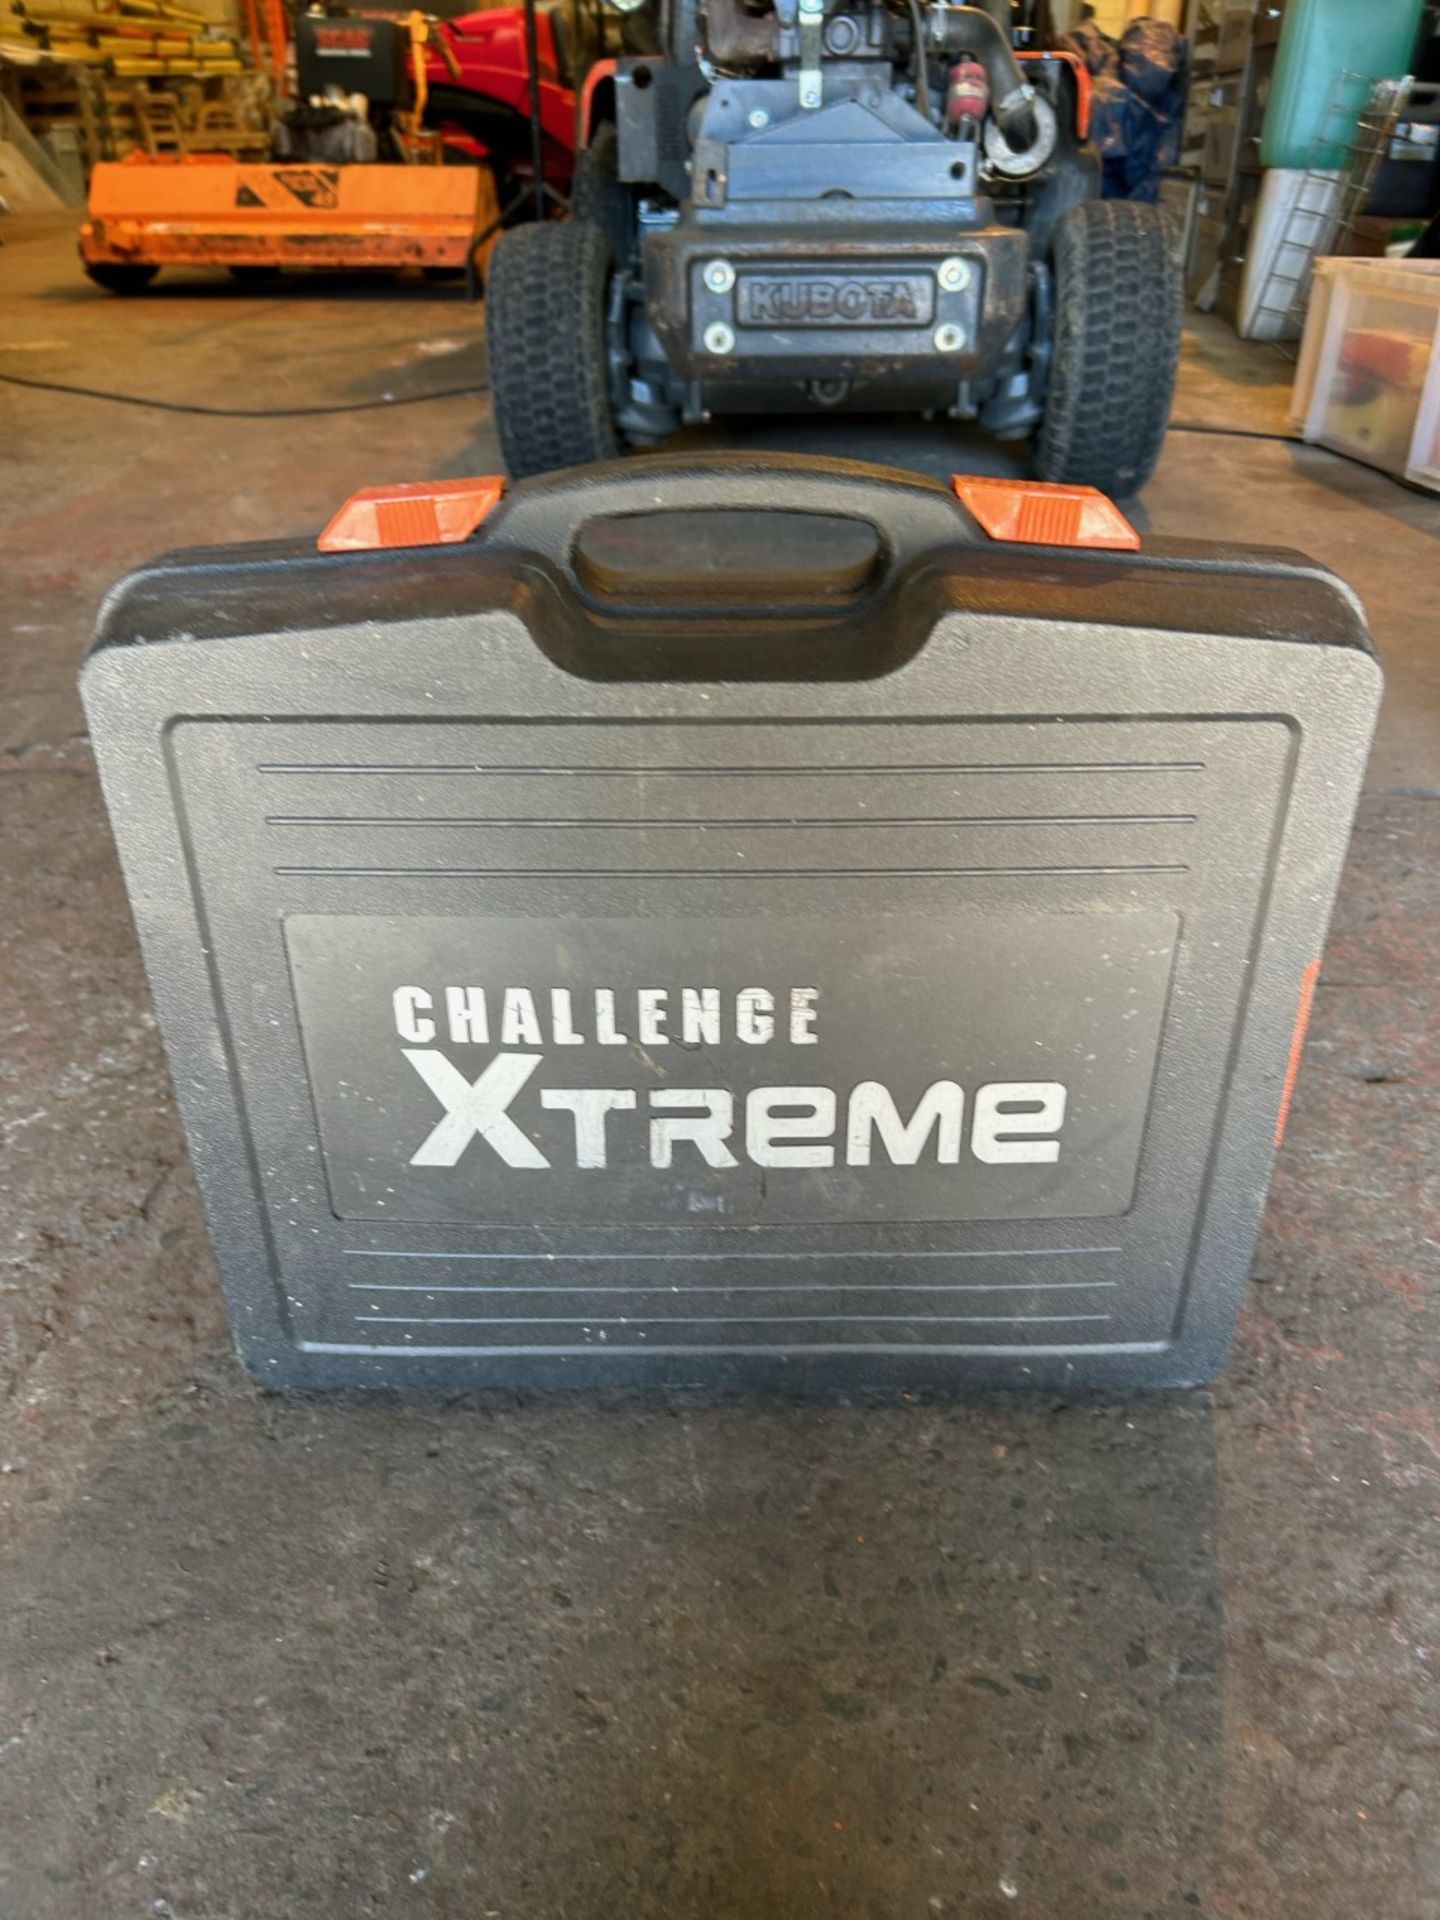 Challenge extreme sds rotary hammer drill. Good condition, full working order as seen in video - Image 3 of 3